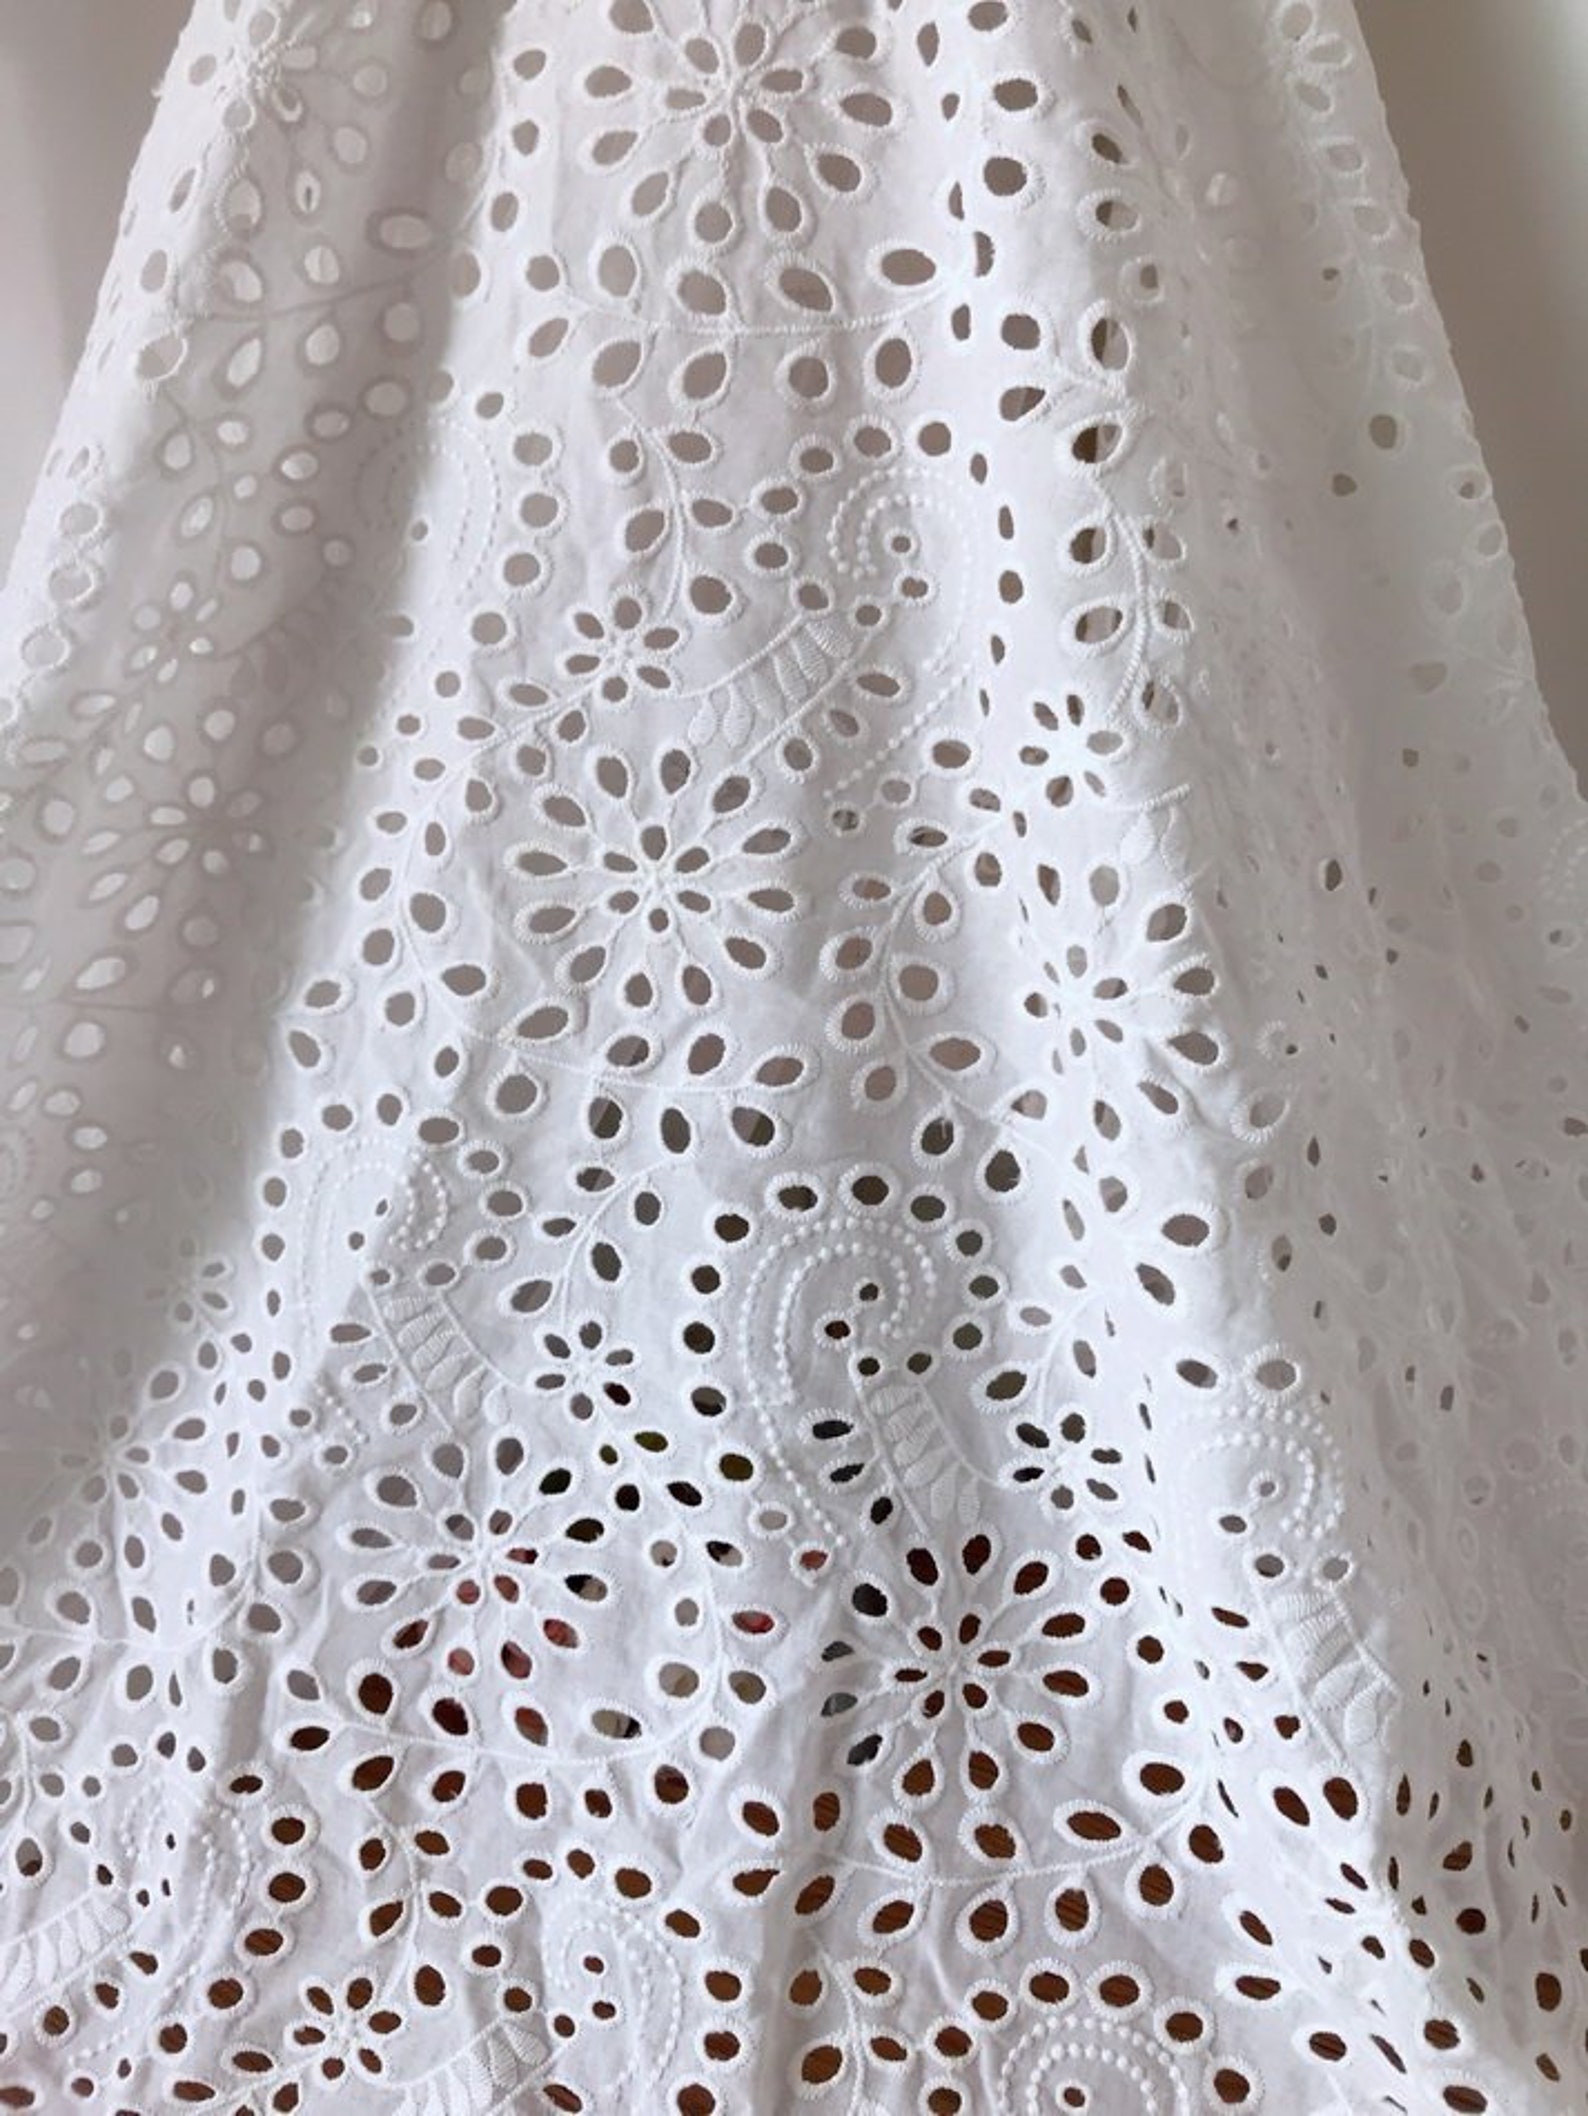 Cotton Fabric Retro Eyelet Flower Cotton Lace Fabric in off - Etsy